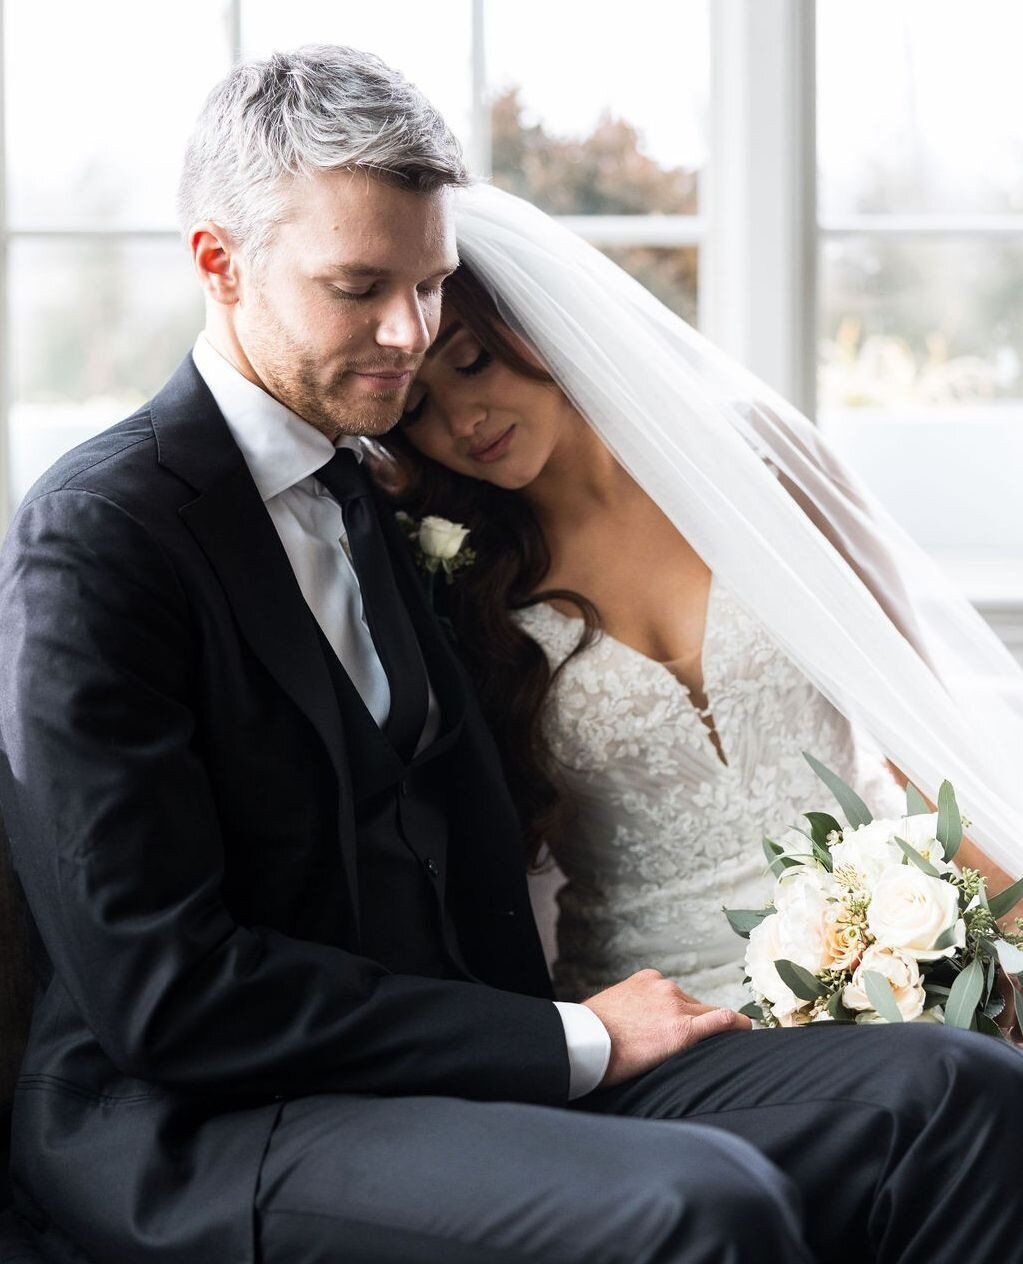 ⁠Kicking off 2024 with Sophia and Grant's unforgettable wedding at The Park Savoy was an absolute dream! From the elegant surroundings of The Park Savoy to the cutest little love muffins (yes, that's you Sophia and Grant), every moment was too good t